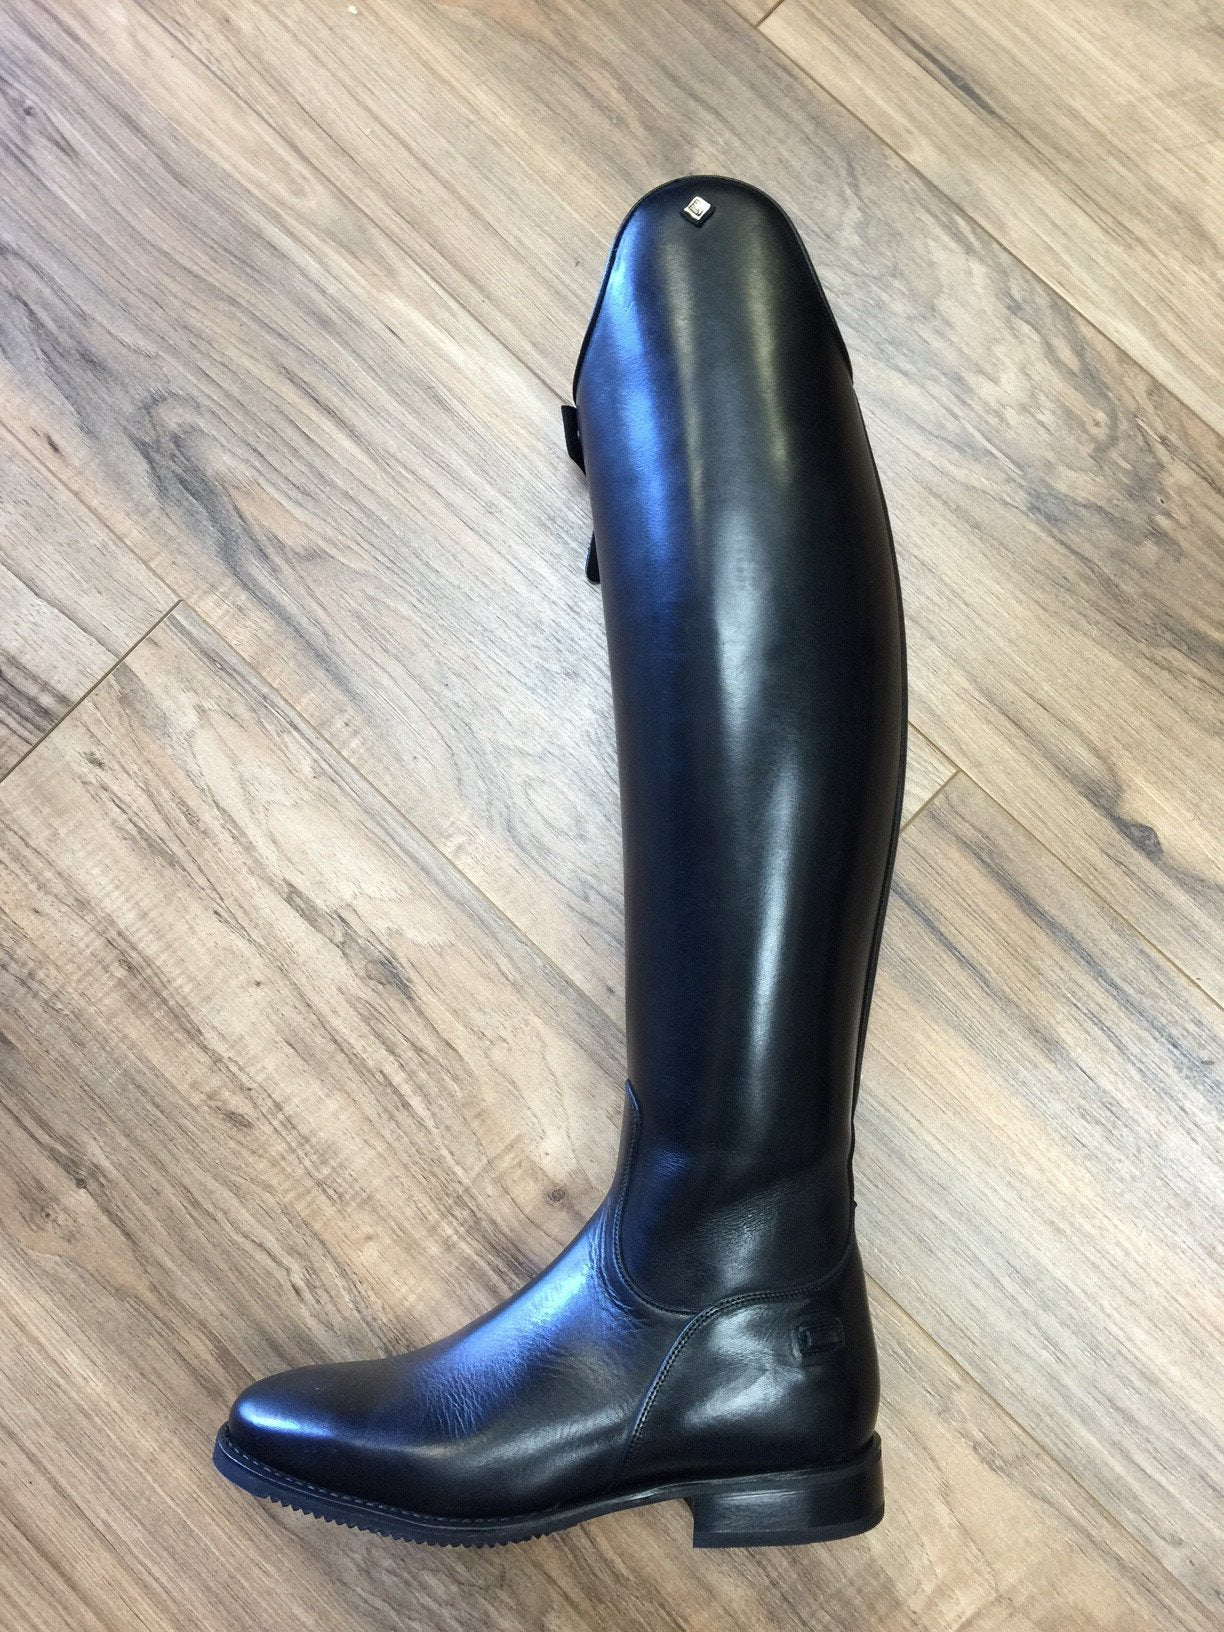 Deniro Magnifico Dressage boot size 38 made to measure - Gee Gee Equine Equestrian Boutique 
 - 1